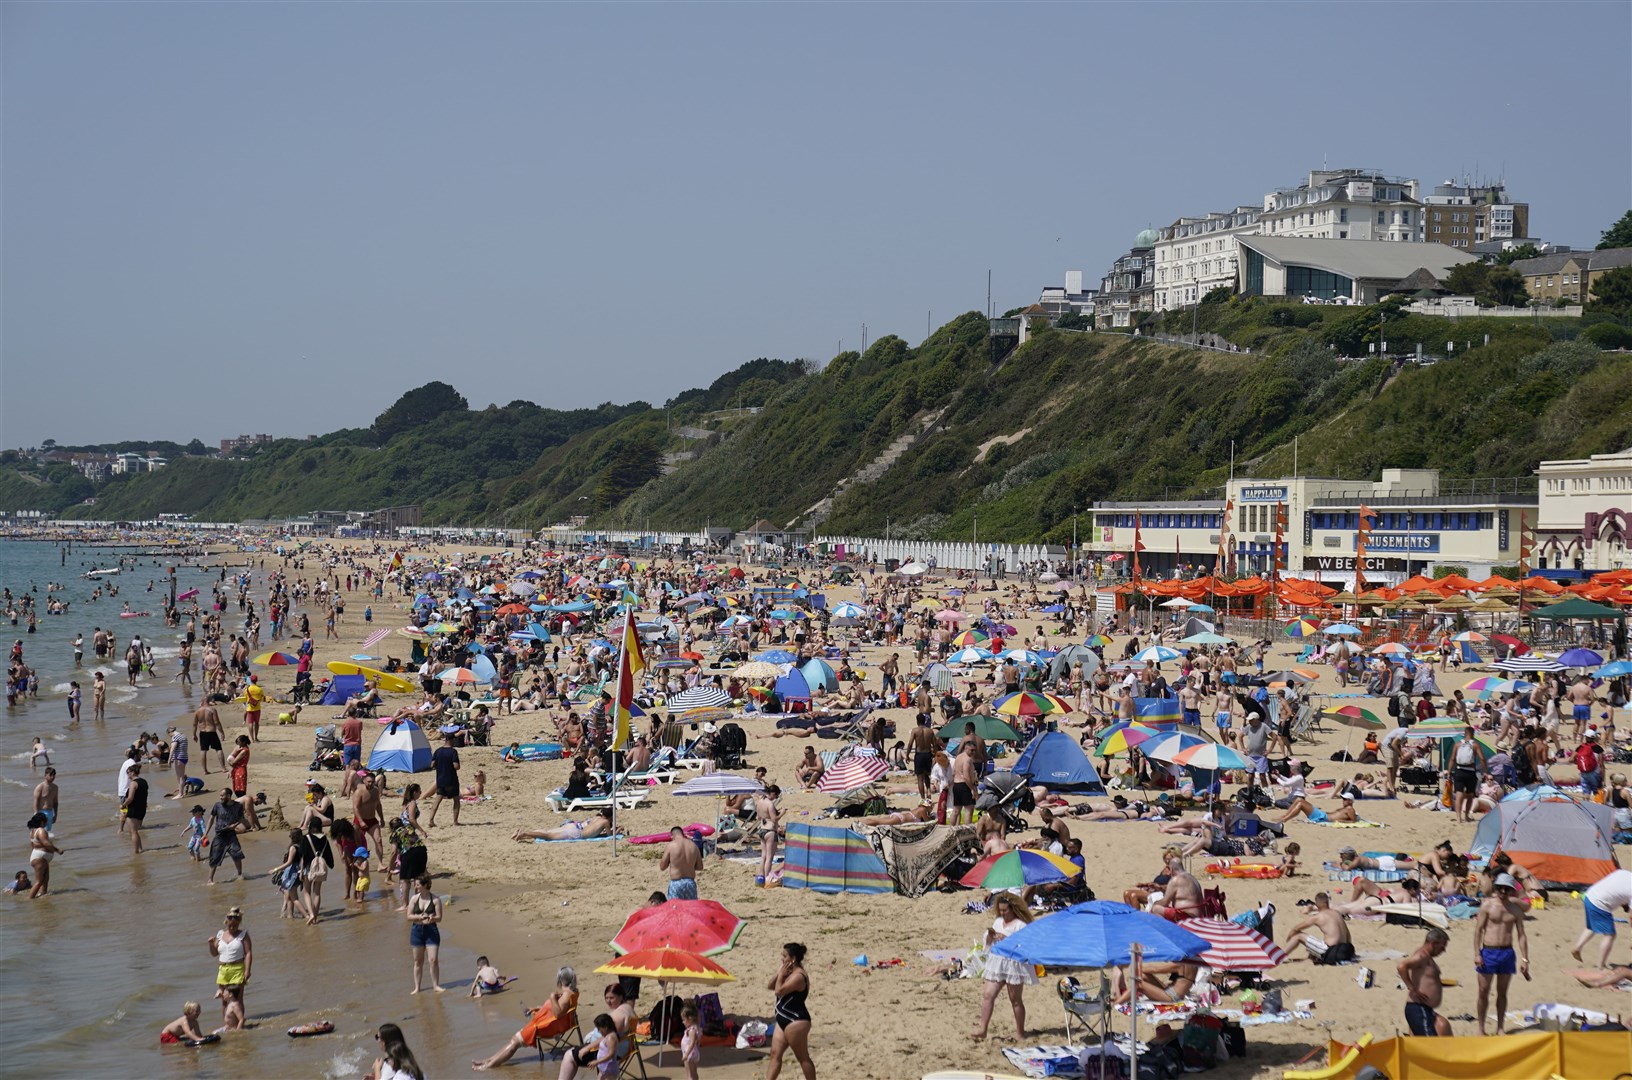 People enjoy the warm weather on Bournemouth beach in Dorset on Friday (Andrew Matthews/PA Wire)